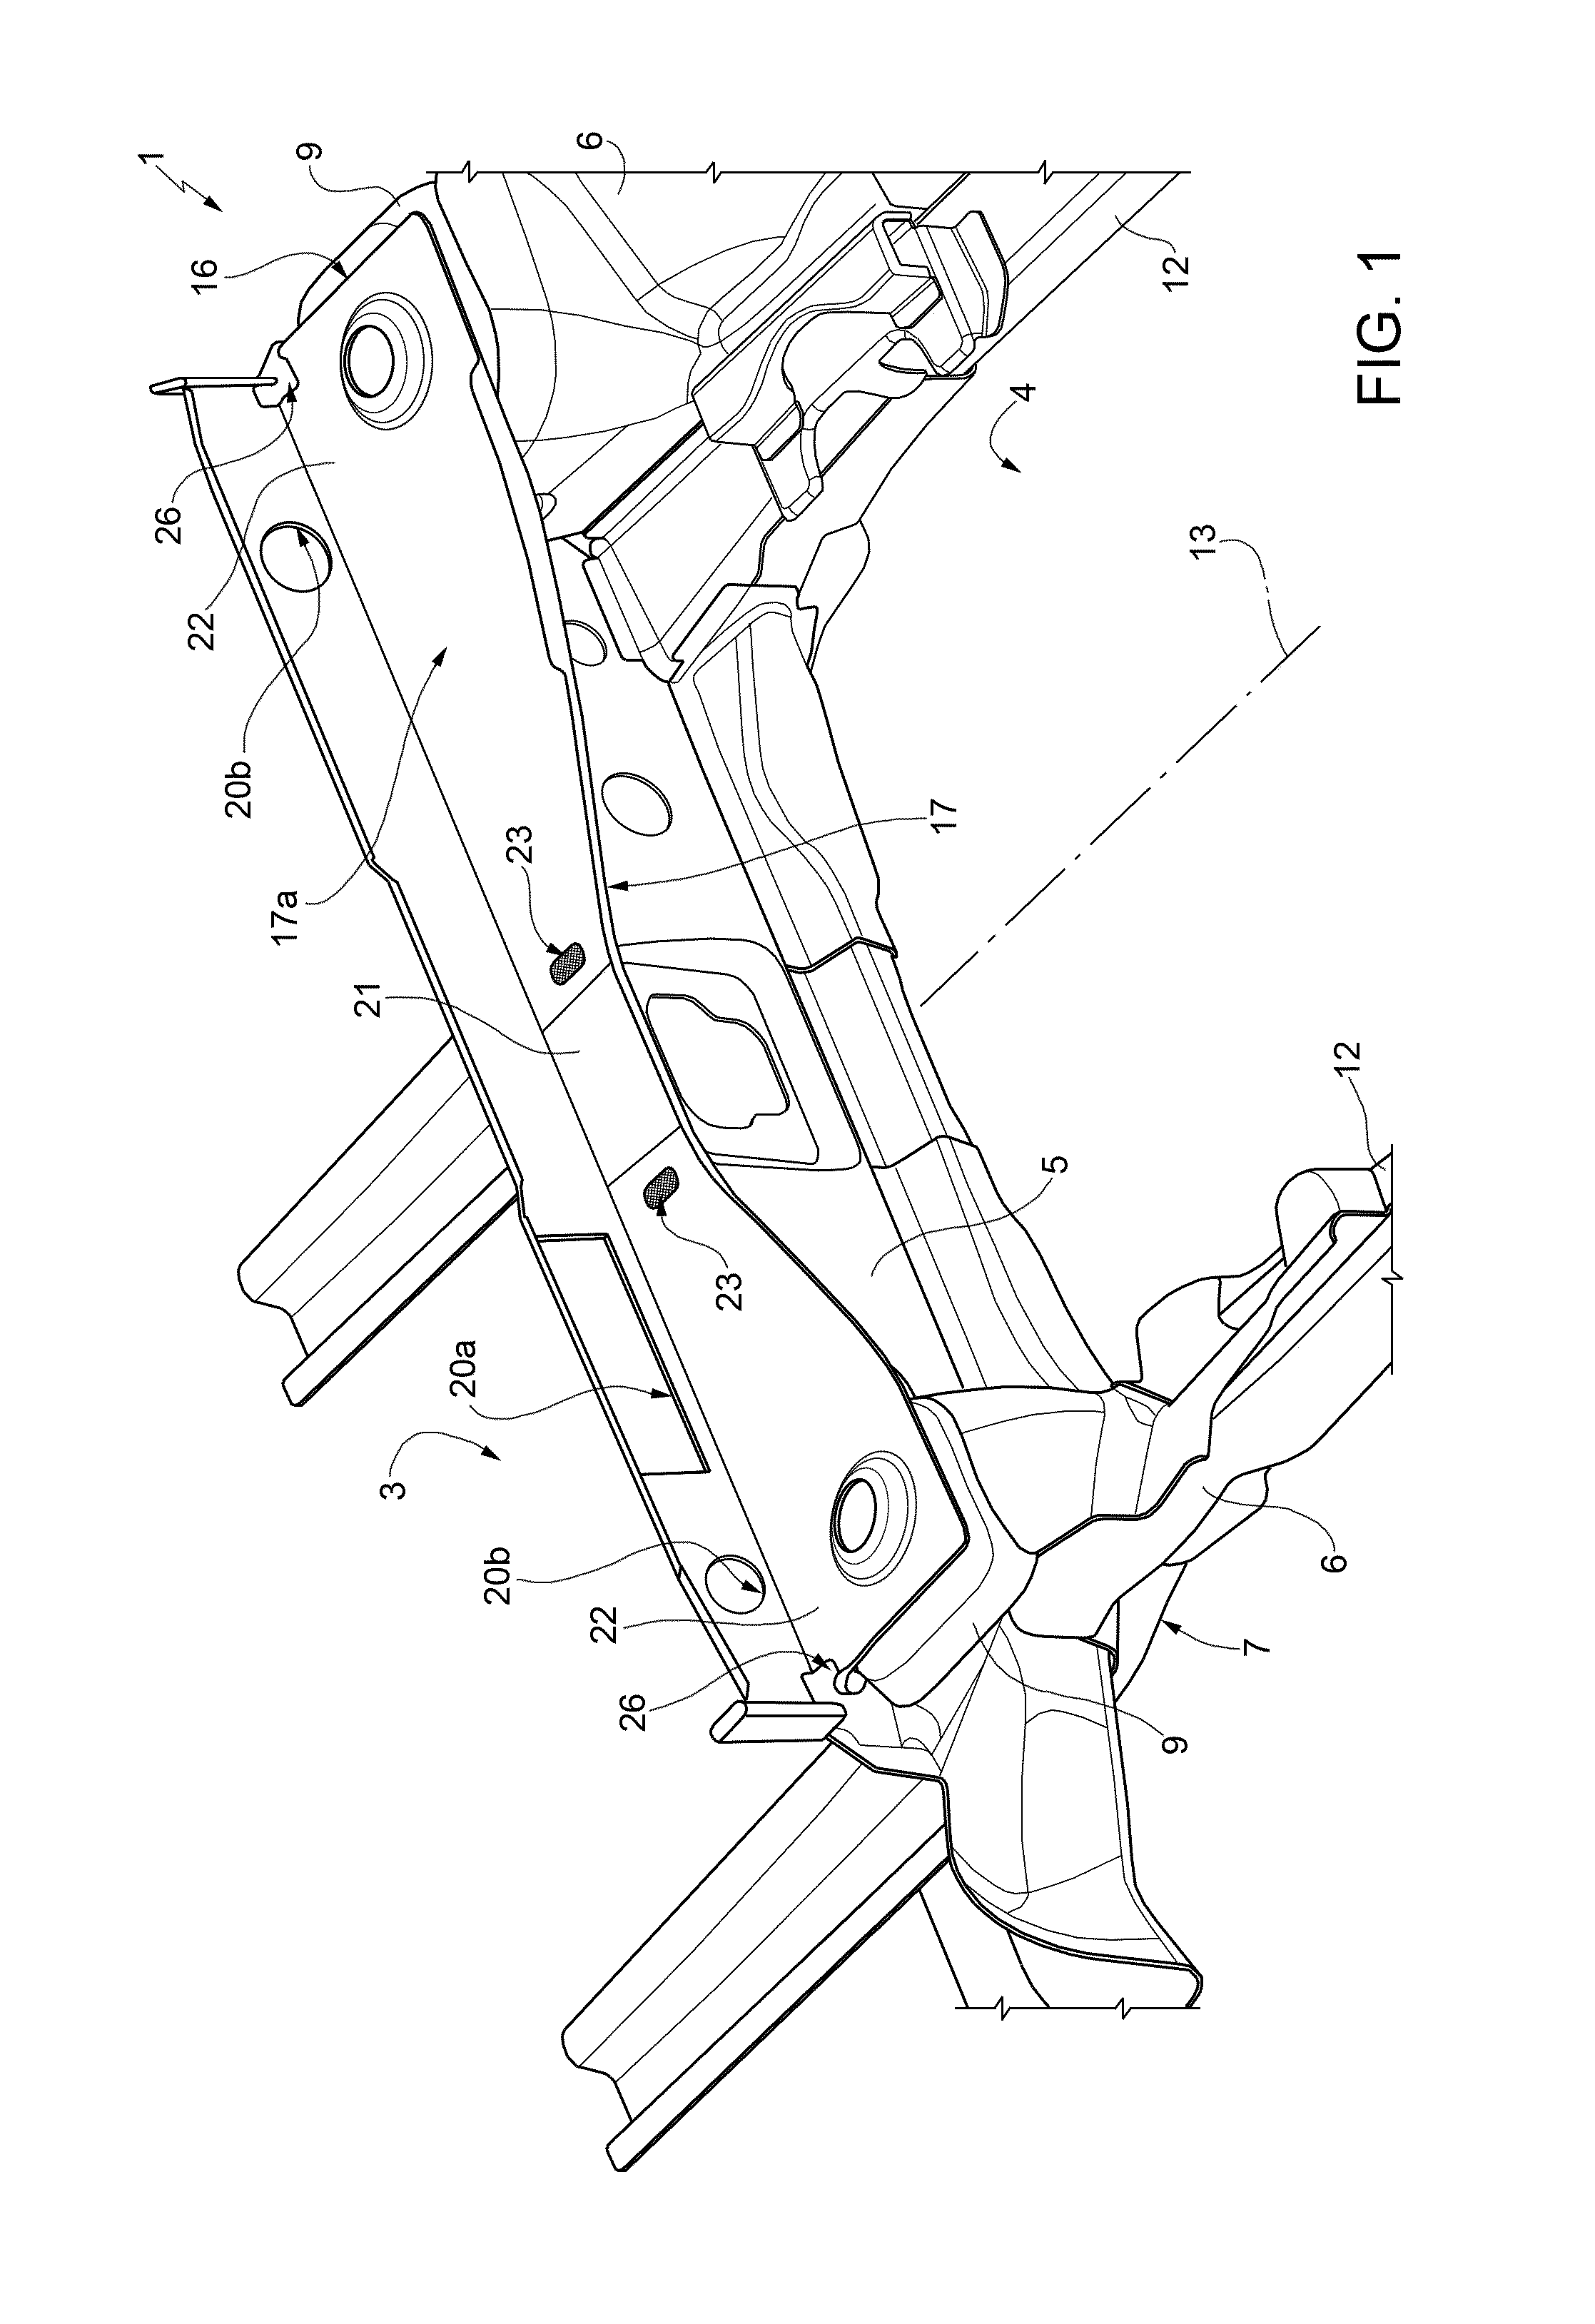 Motor vehicle body provided with a structure for receiving and draining water